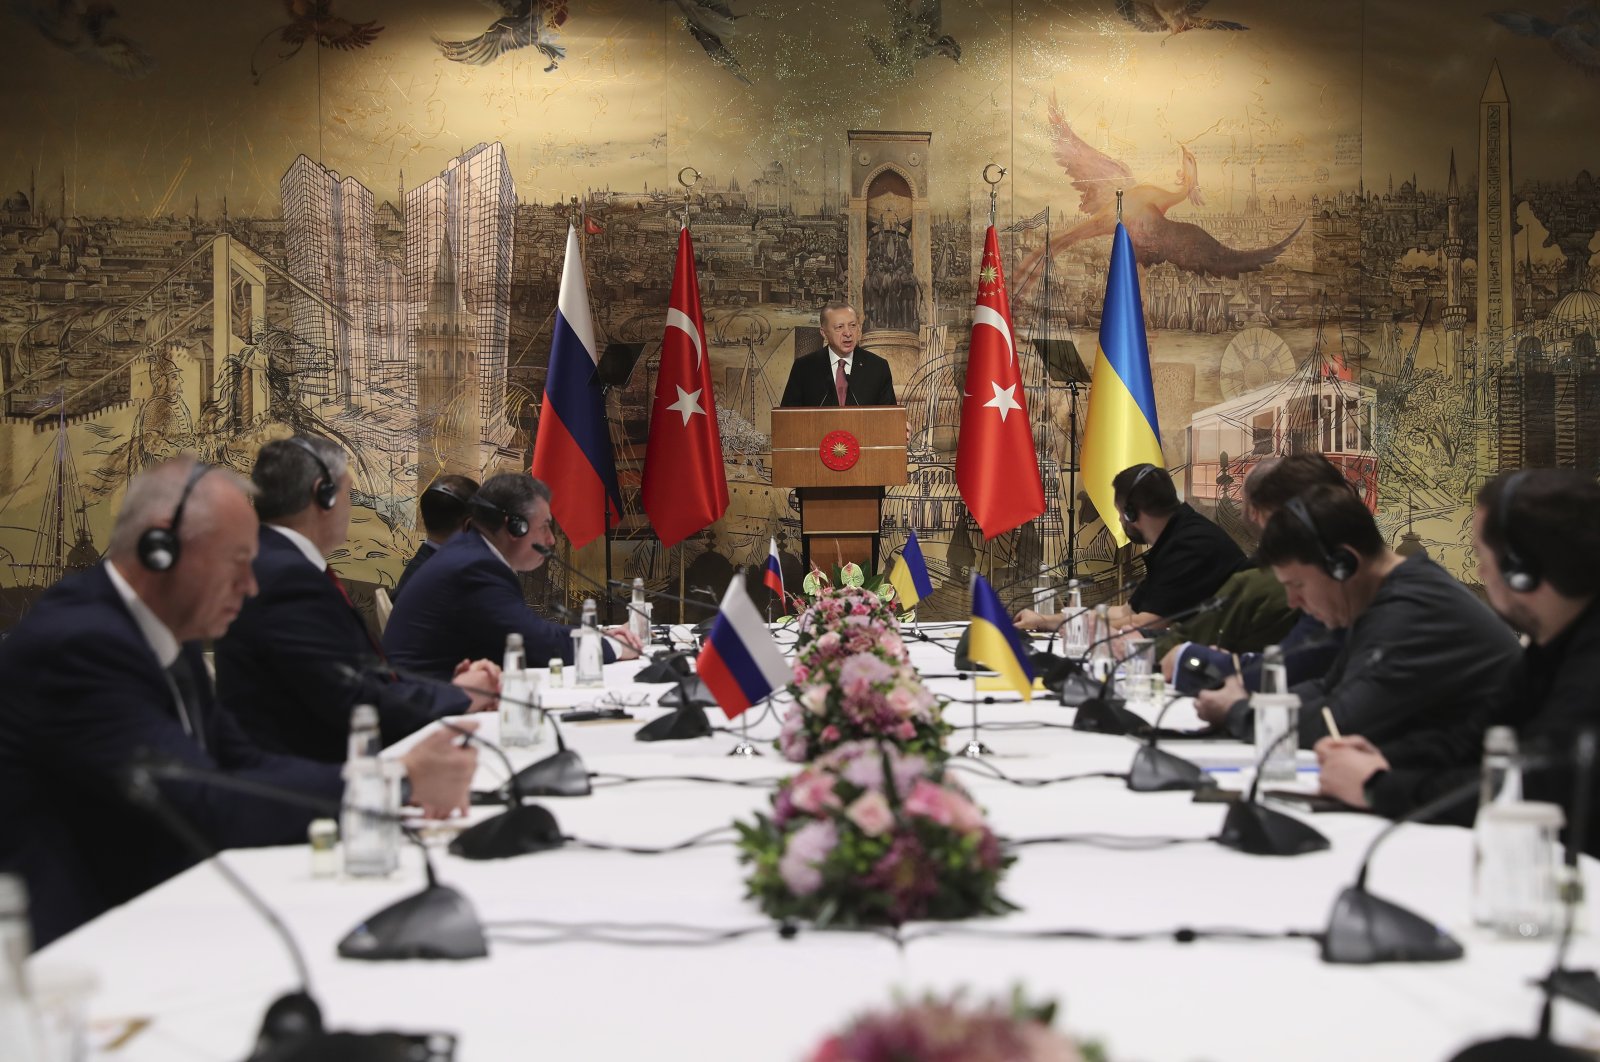 President Recep Tayyip Erdoğan gives a speech to welcome the Russian and Ukrainian delegations ahead of their talks, in Istanbul, Turkey, March 29, 2022. (AP Photo)